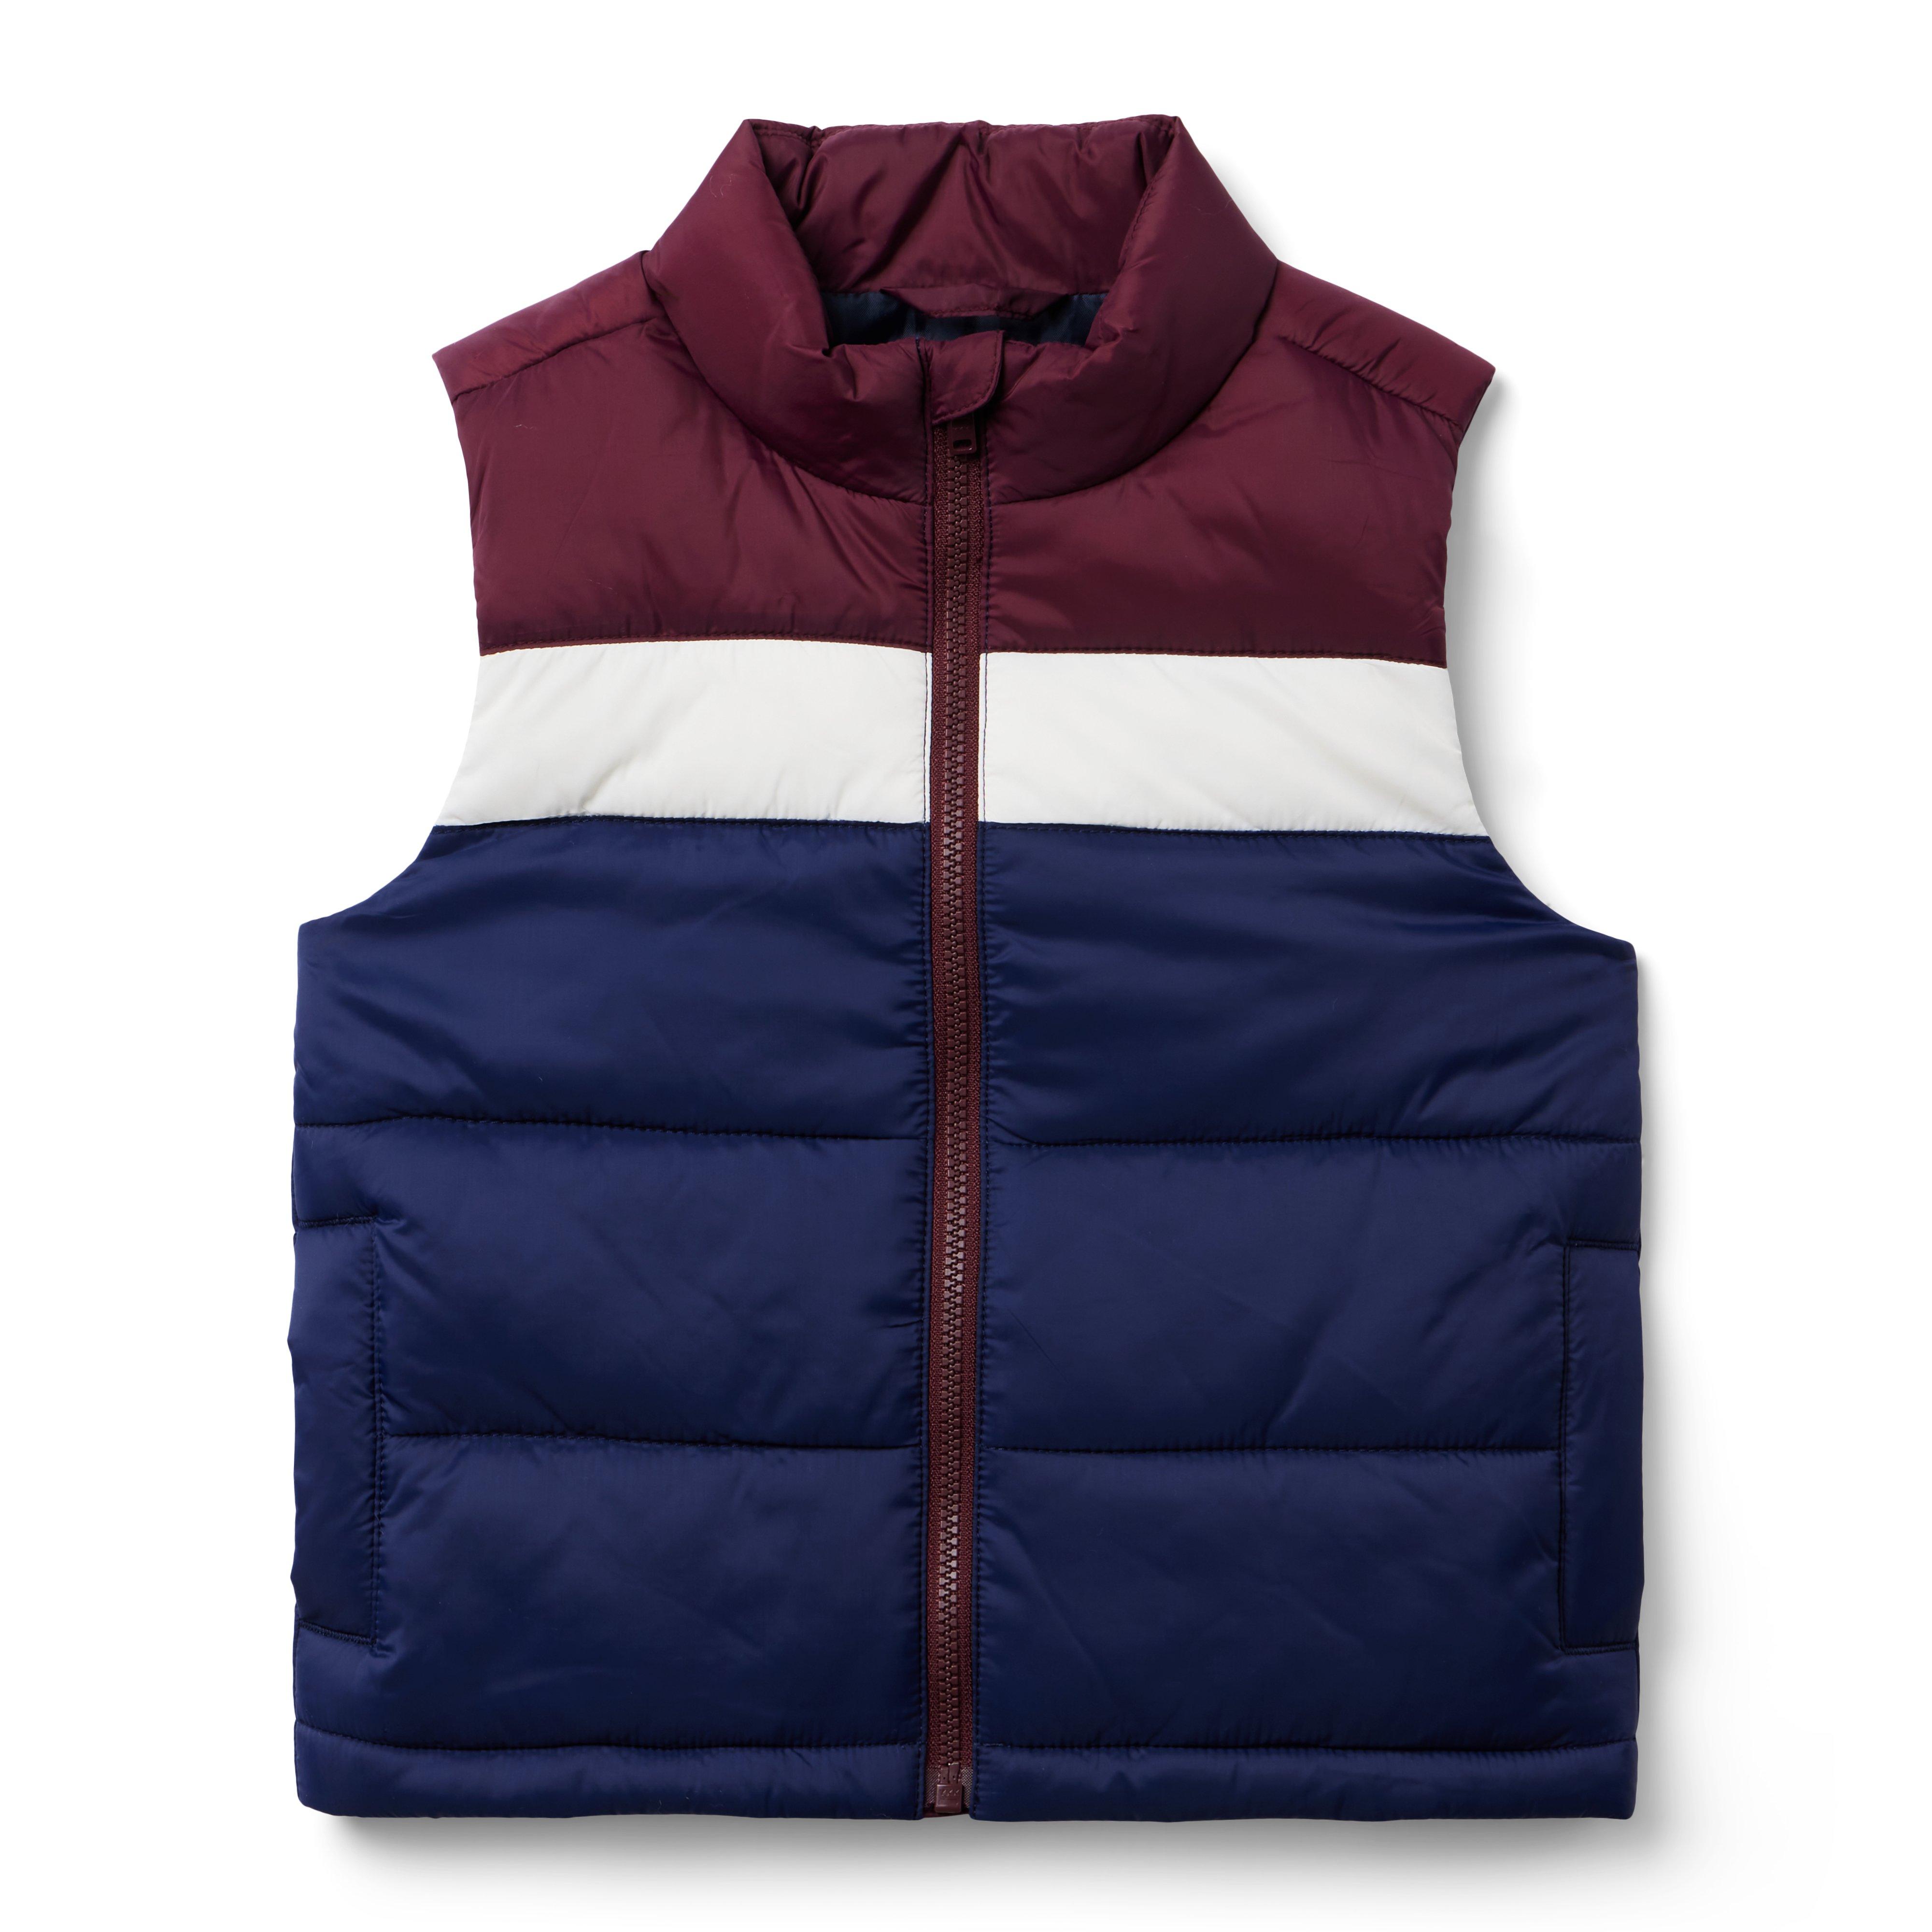 Boy Merchant Marine The Lakeside Puffer Vest by Janie and Jack